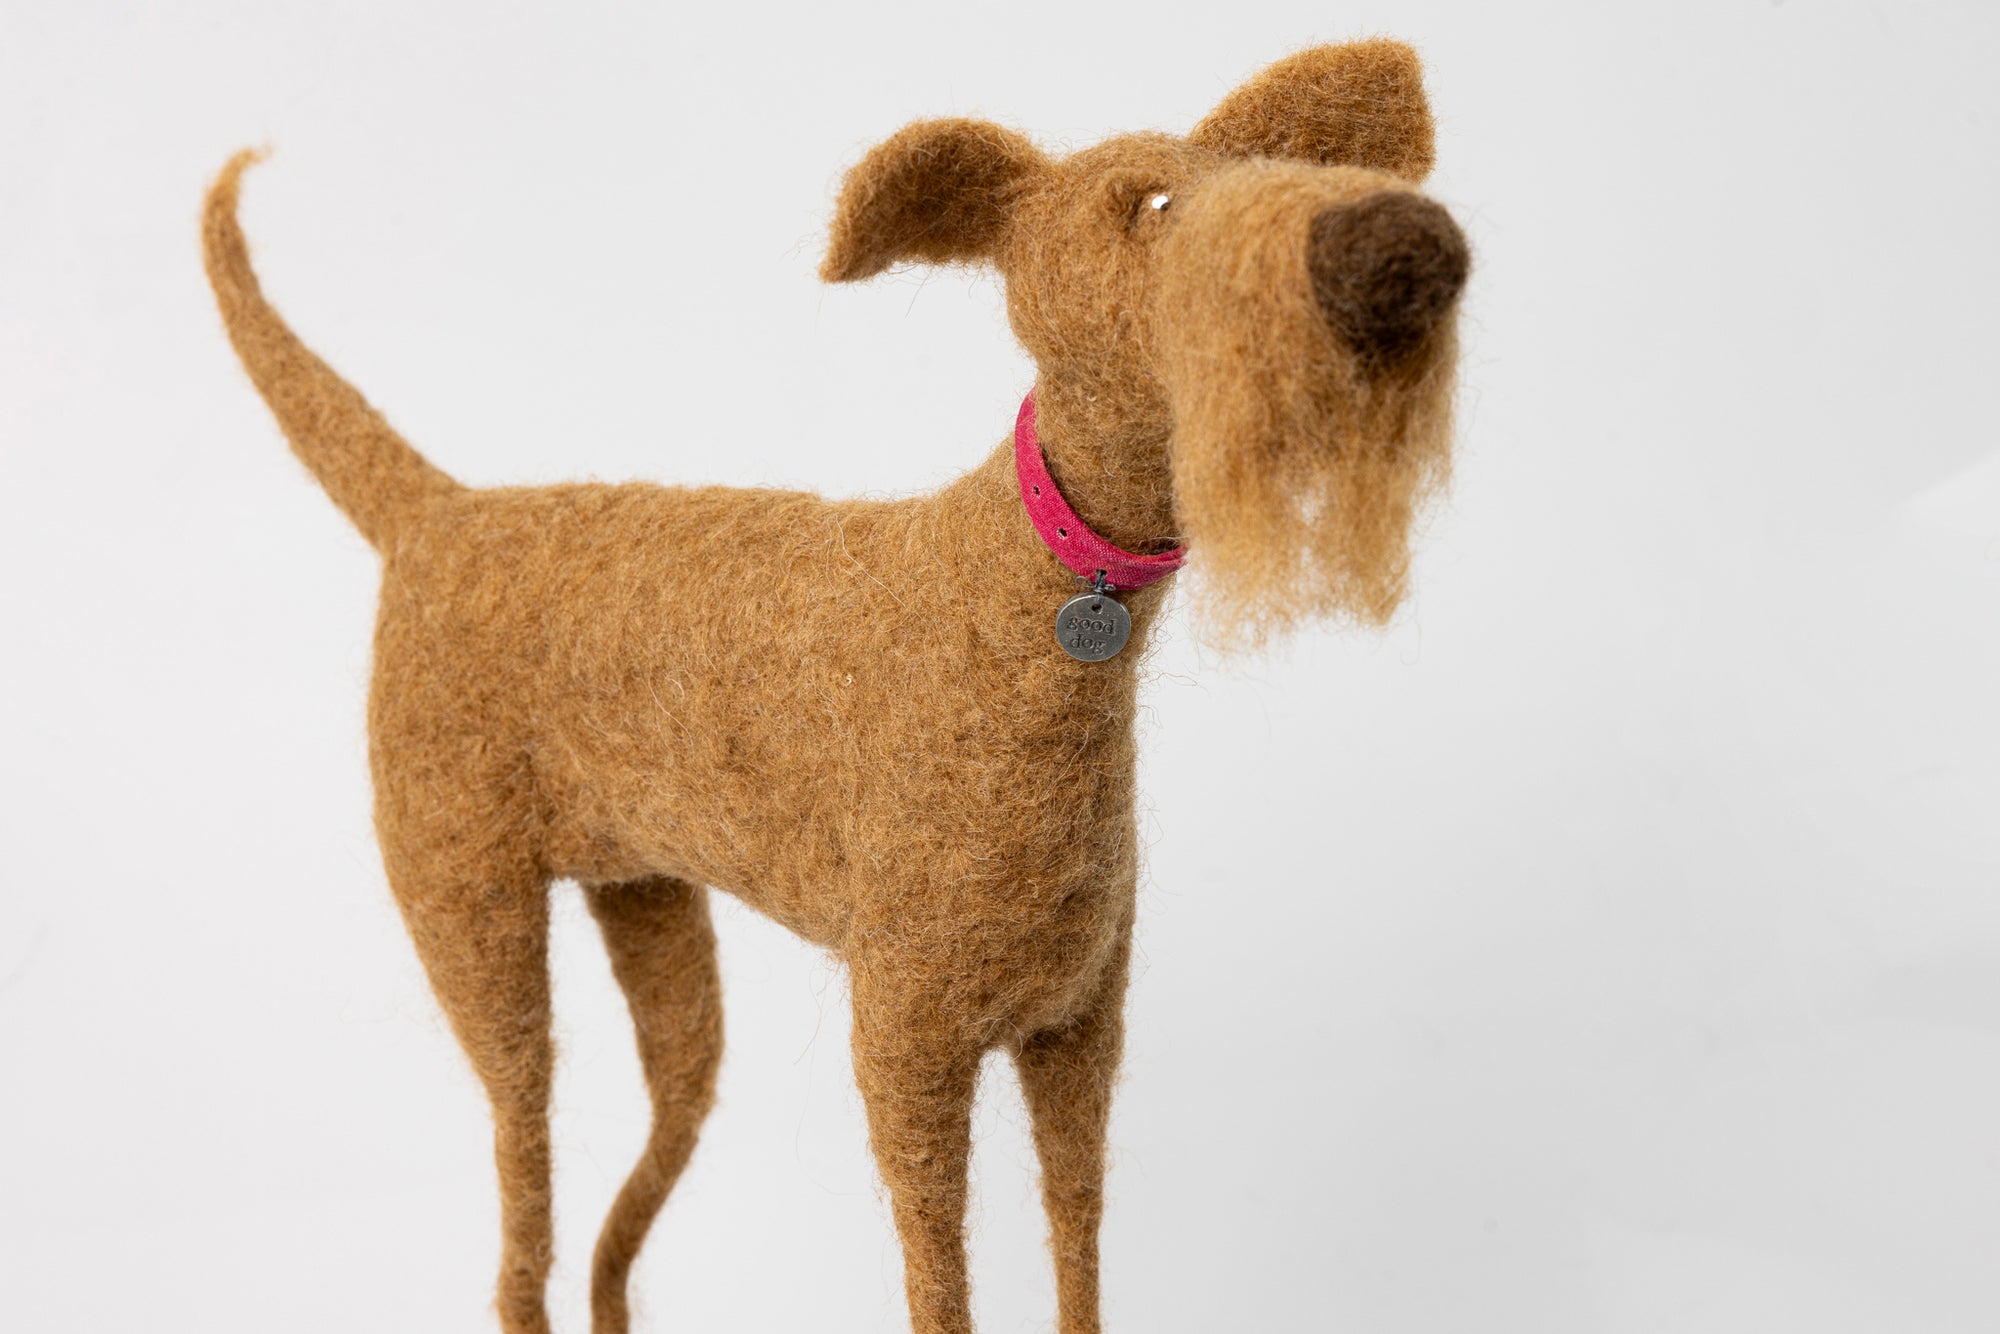 'Brisket' needlefelt character dog by Kate Toms, available at Padstow Gallery, Cornwall